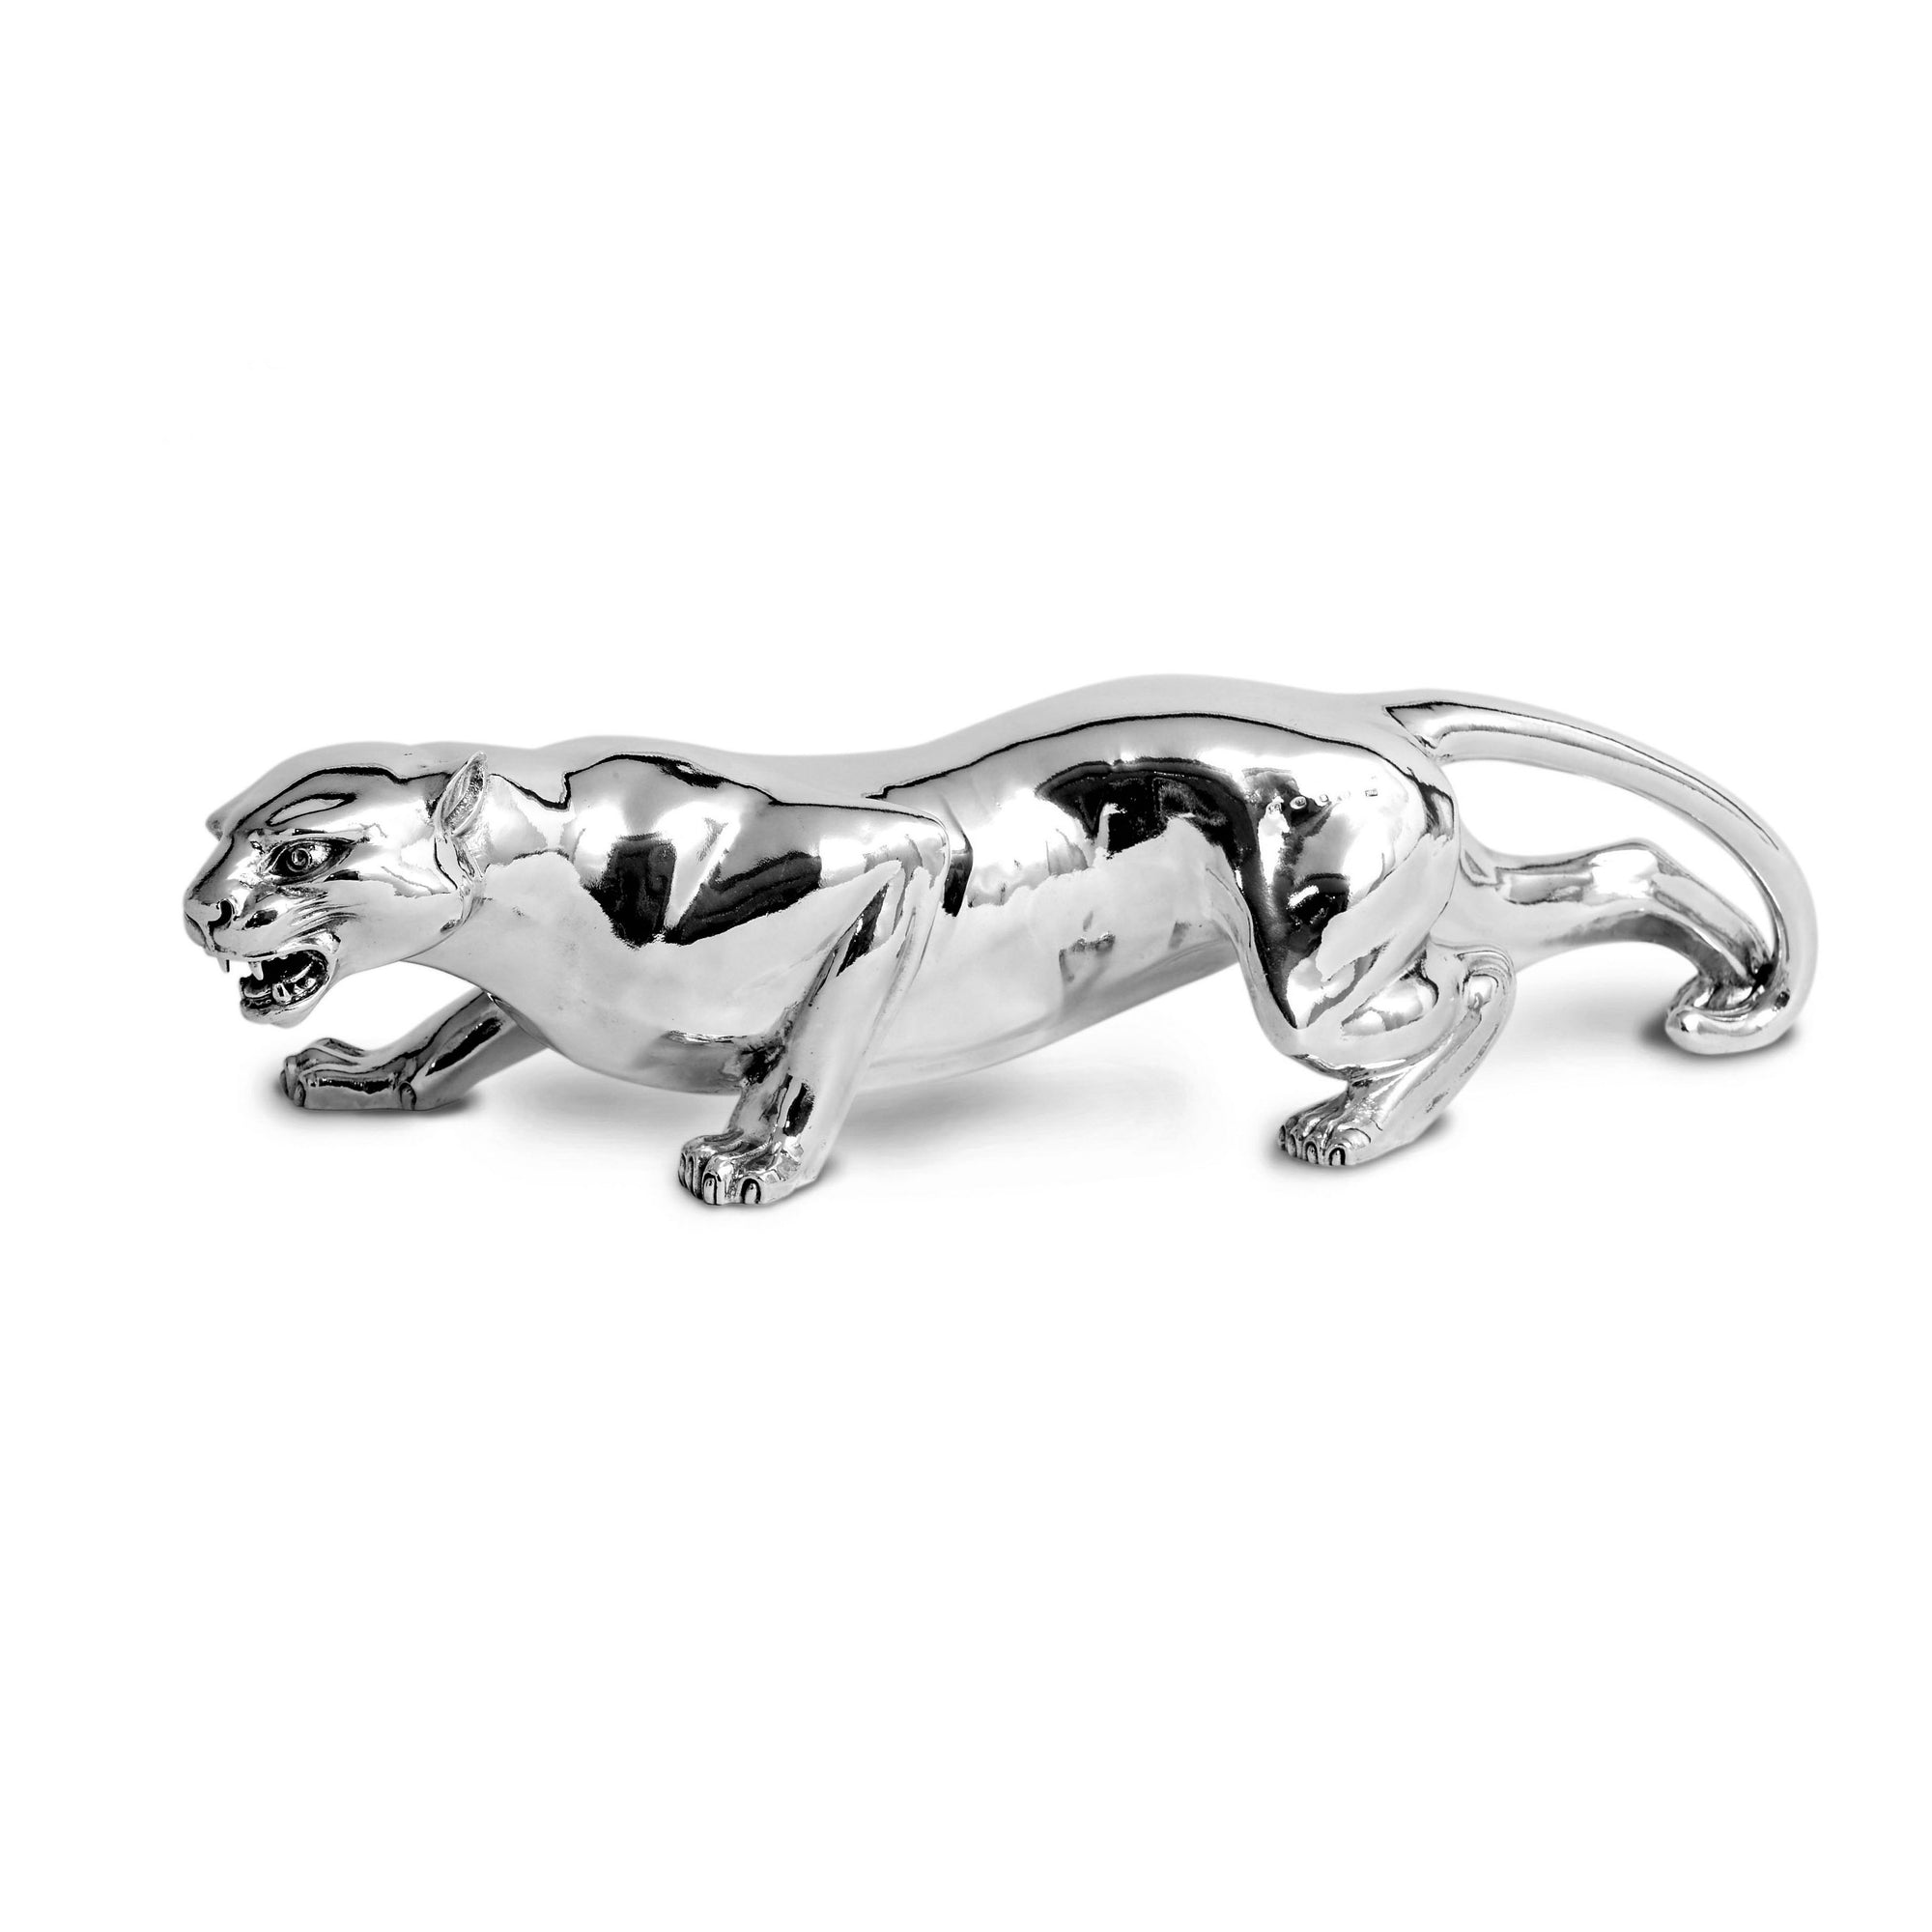 Why choose a silver panther ornament?